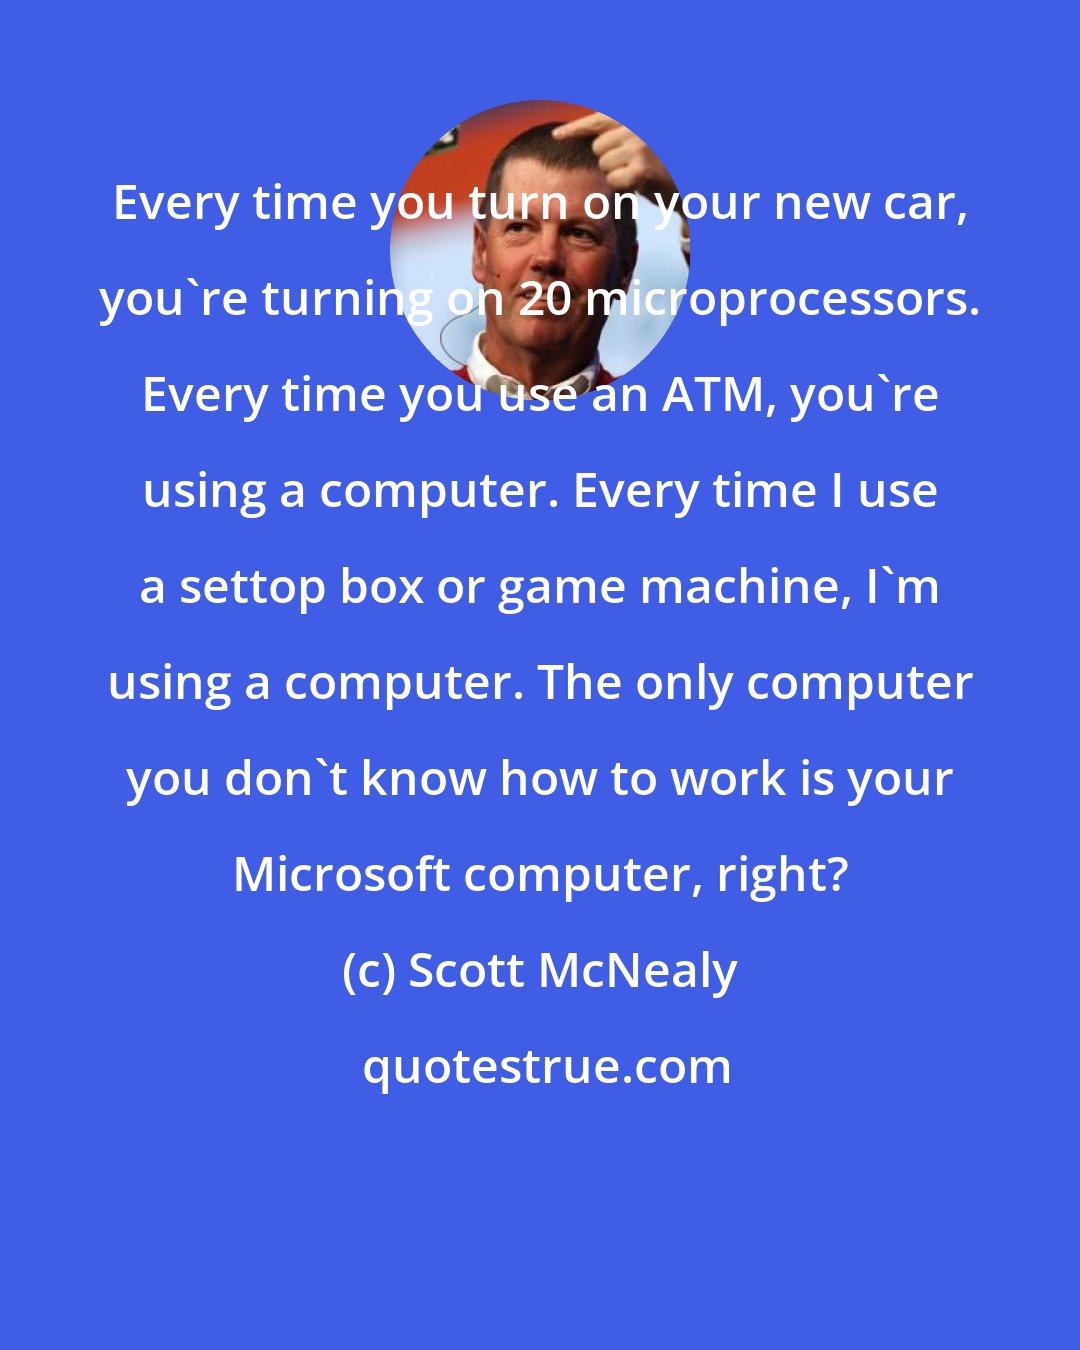 Scott McNealy: Every time you turn on your new car, you're turning on 20 microprocessors. Every time you use an ATM, you're using a computer. Every time I use a settop box or game machine, I'm using a computer. The only computer you don't know how to work is your Microsoft computer, right?